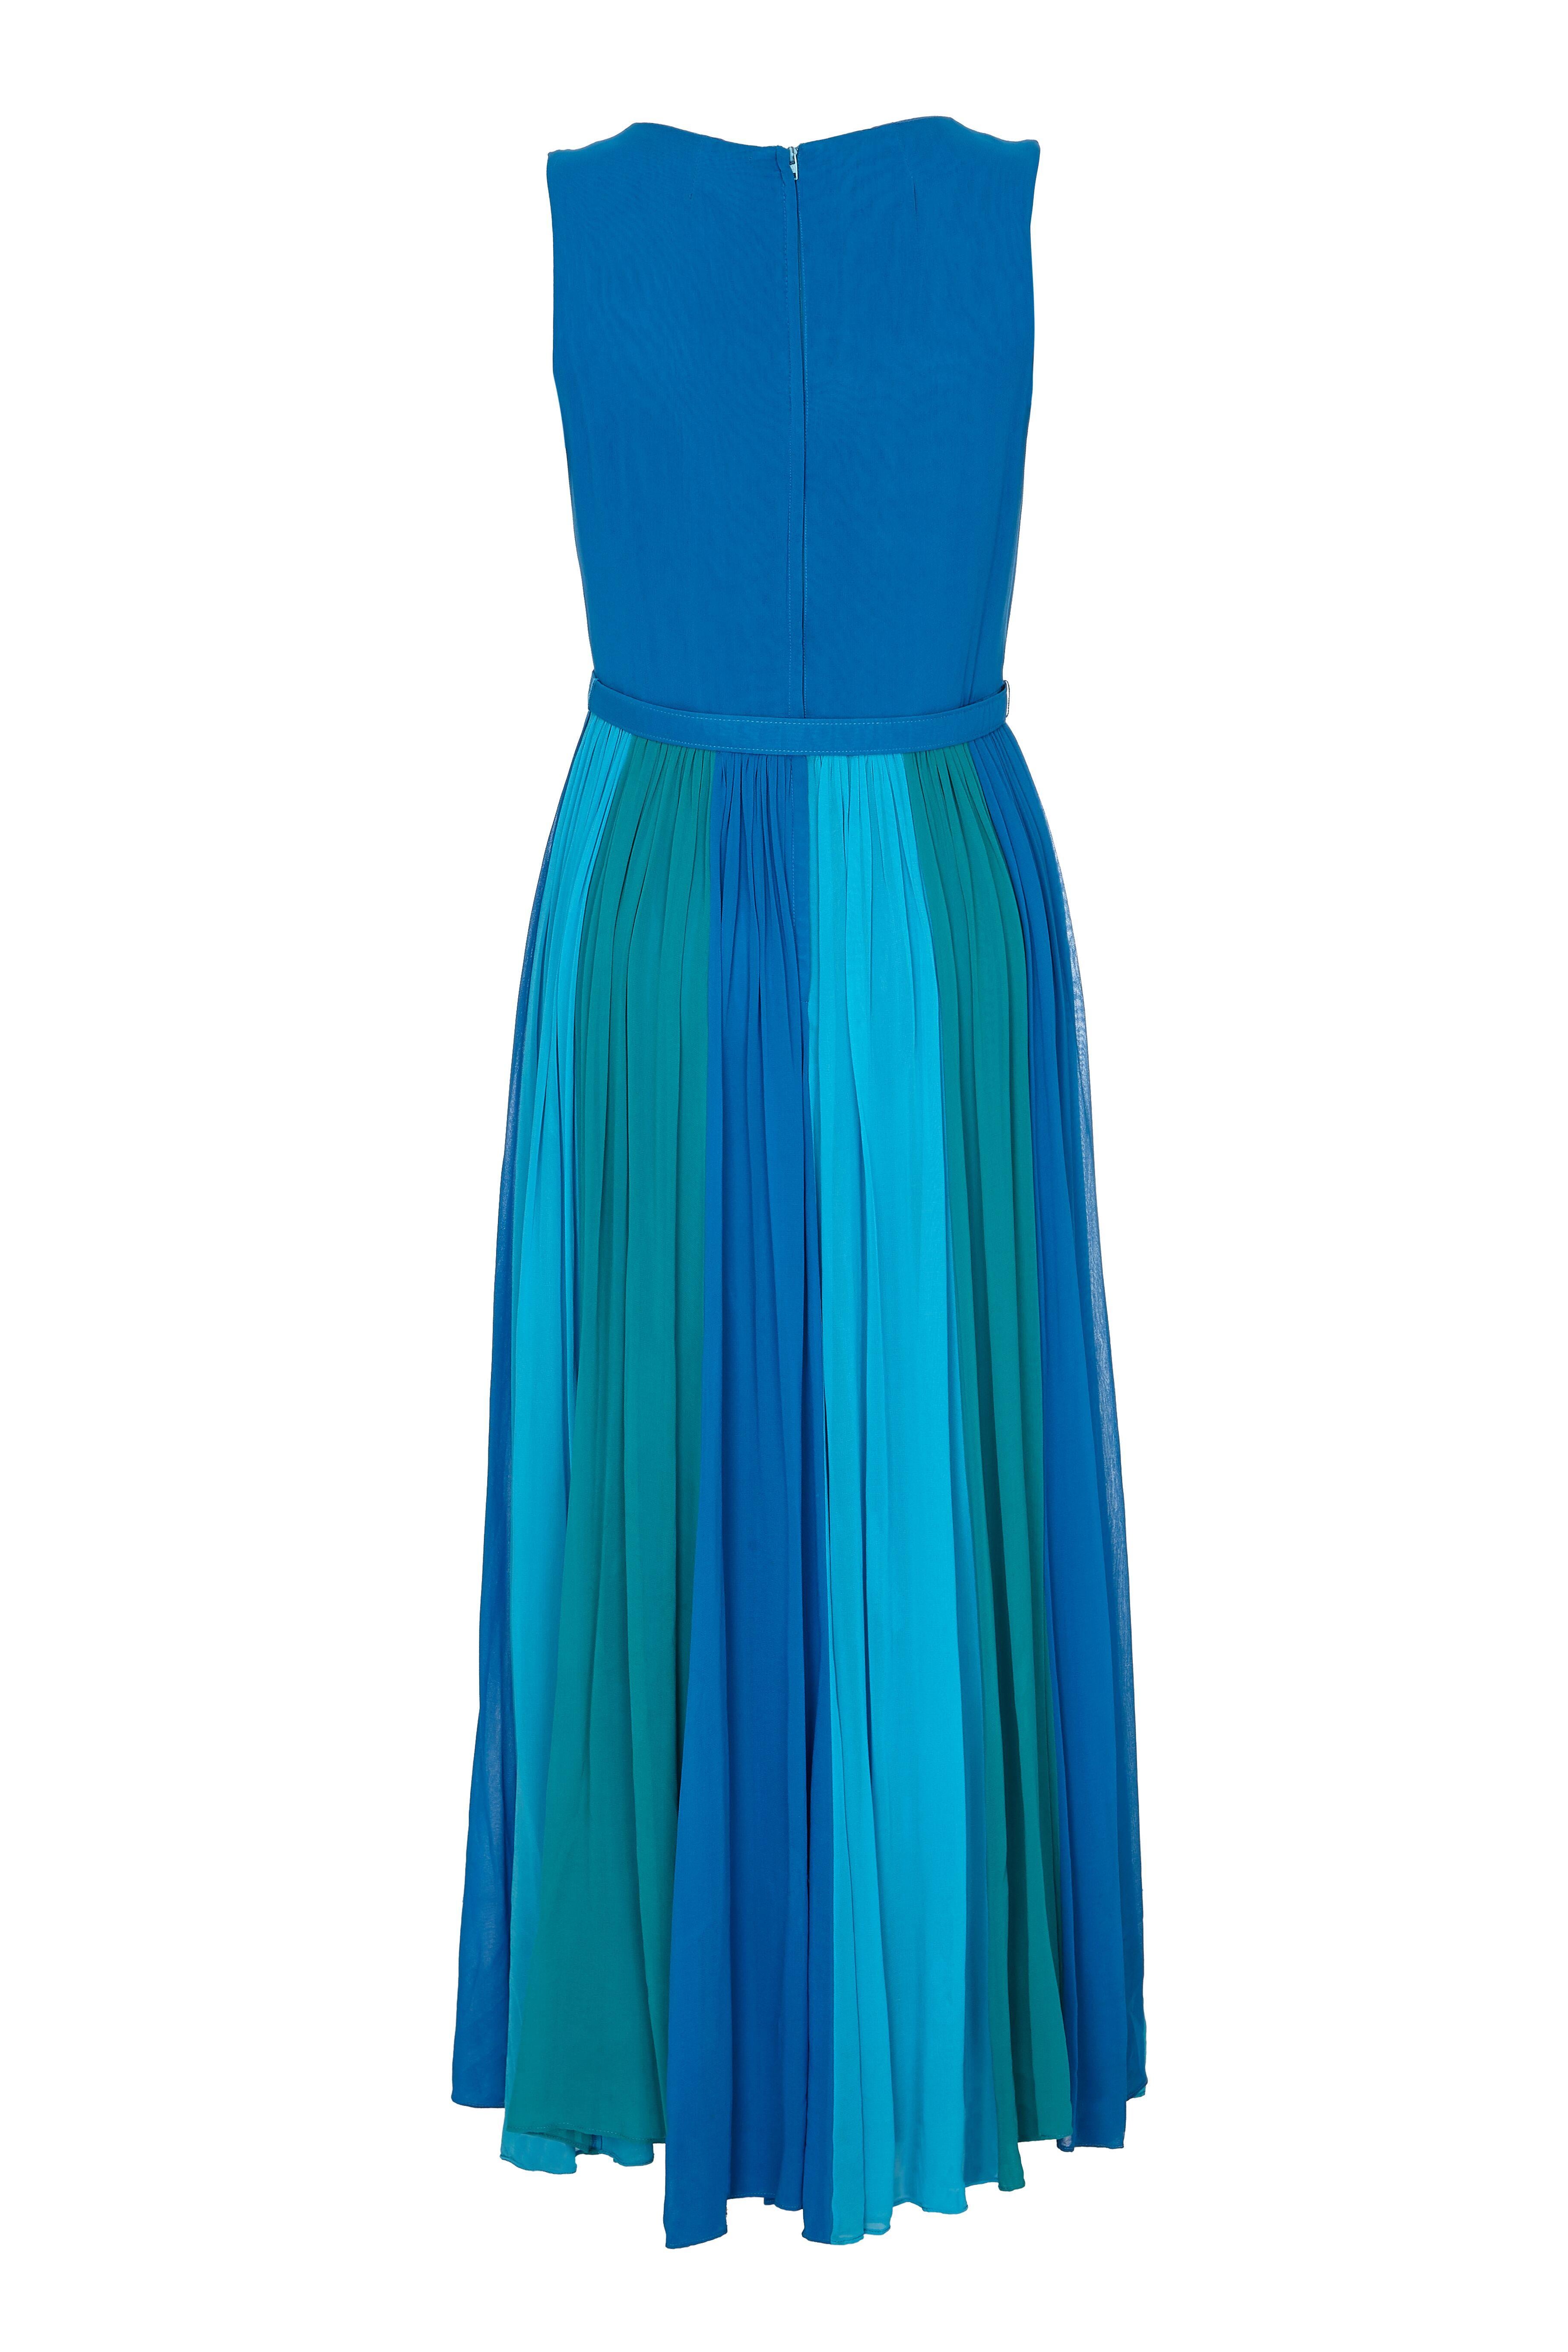 This striking 1960s silk chiffon colour block evening dress in marine blue comes with a matching fabric belt and is in beautiful vintage condition. The dress is a sleeveless shift cut with a dramatic floor sweeping skirt floating from the waist in